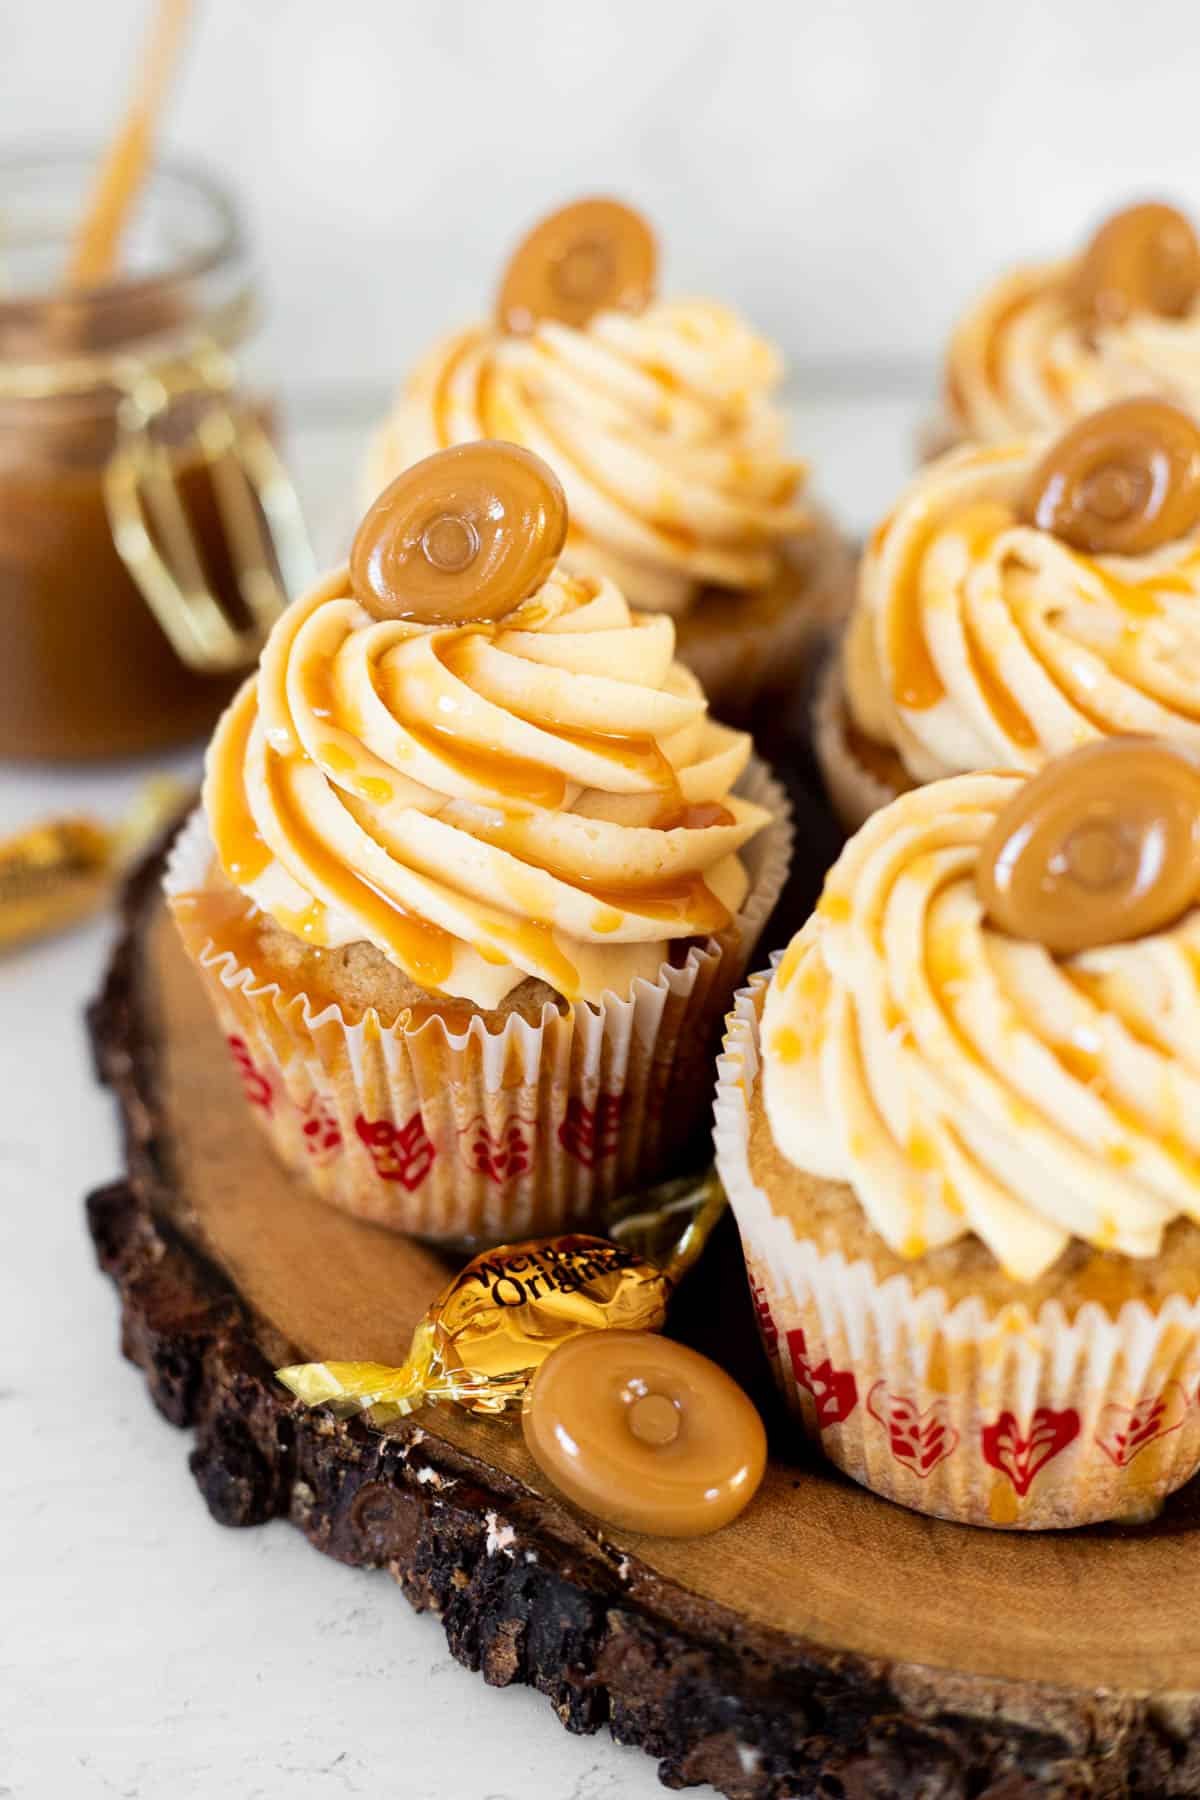 caramel filled cupcakes with buttercream and caramel drizzle on a wood board.